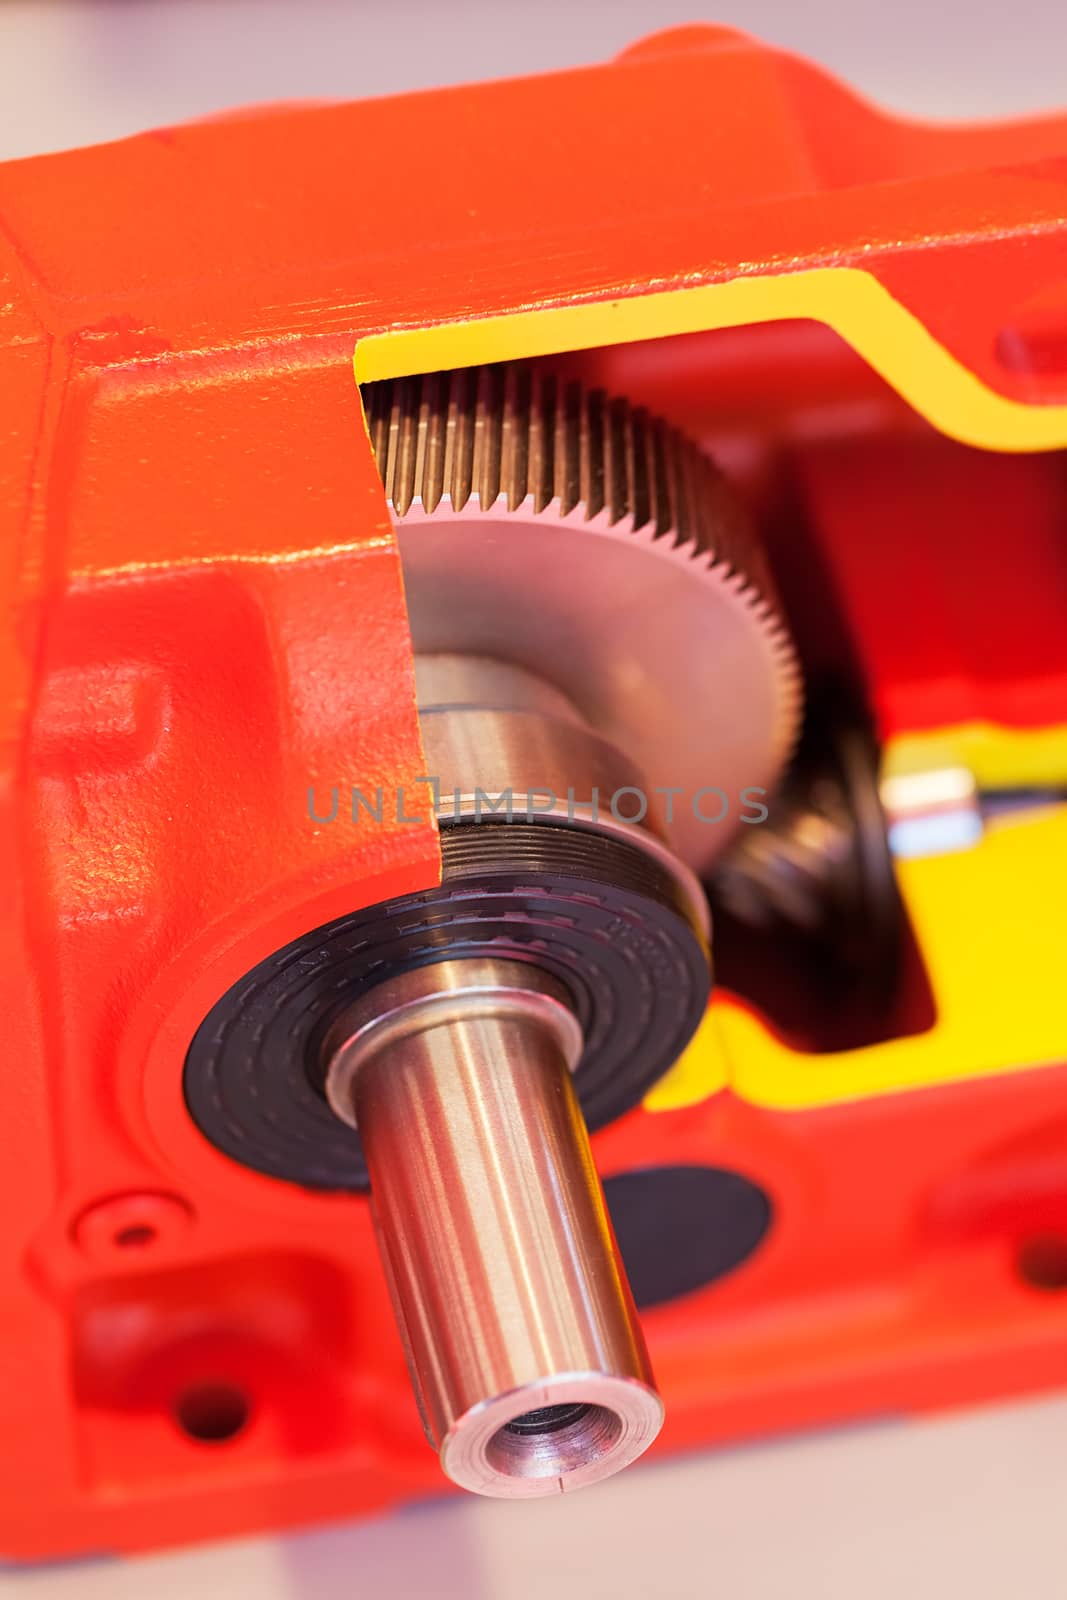 section of vertical gear unit with cylindrical gears, note shallow depth of field